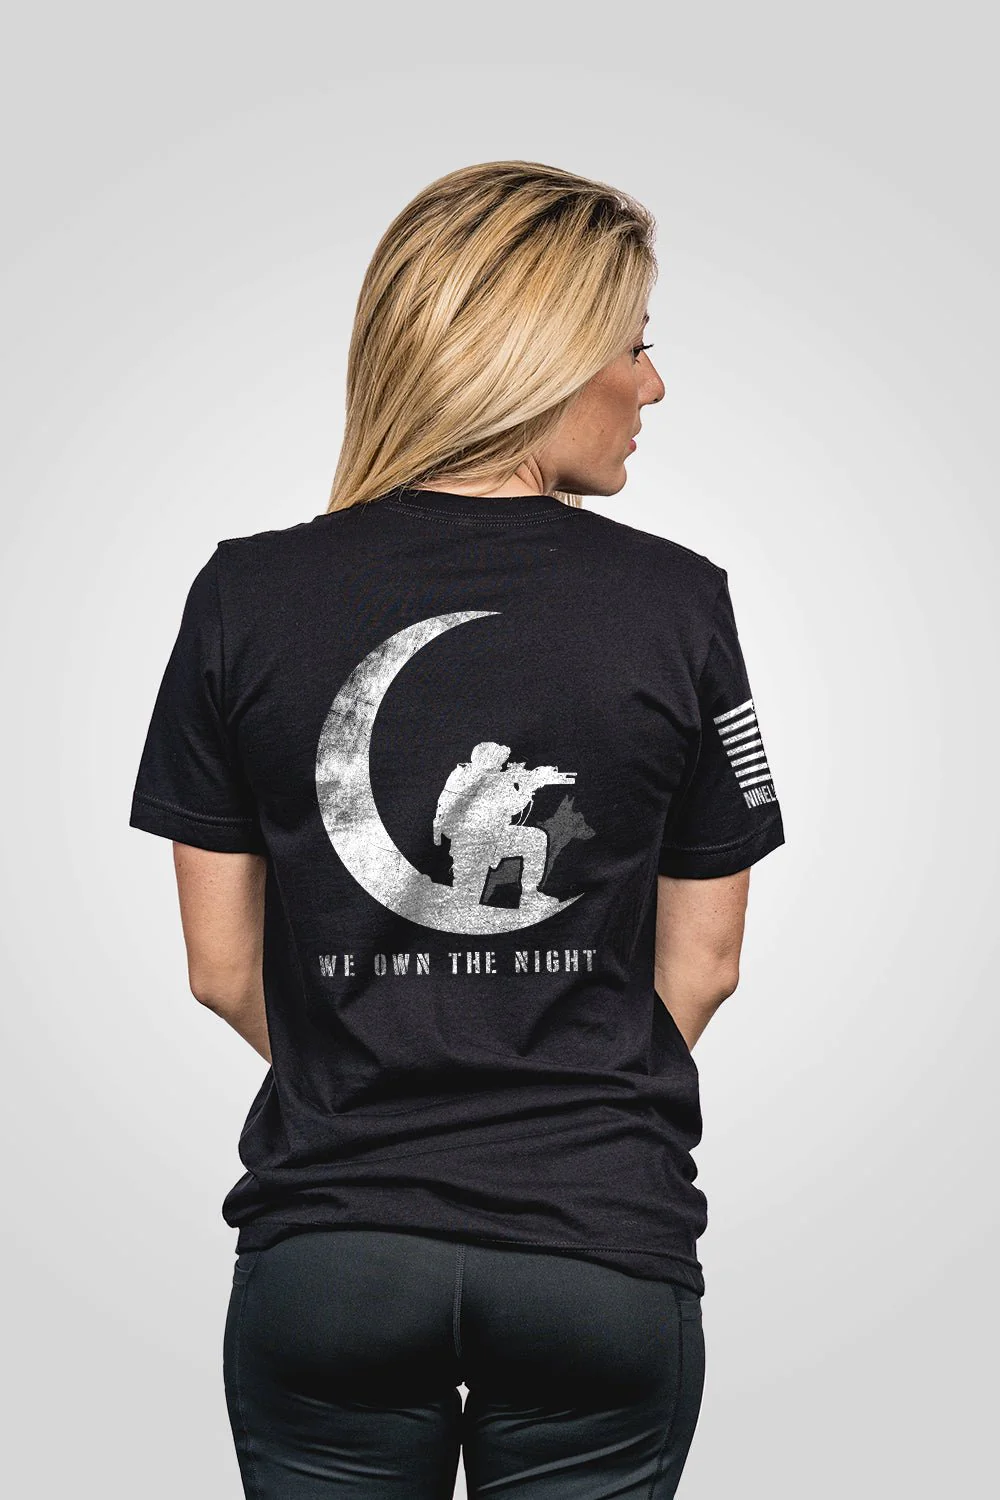 Nine Line Women's Boyfriend Fit T-Shirt - We Own the Night posted by ProdOrigin USA in Women's Apparel 